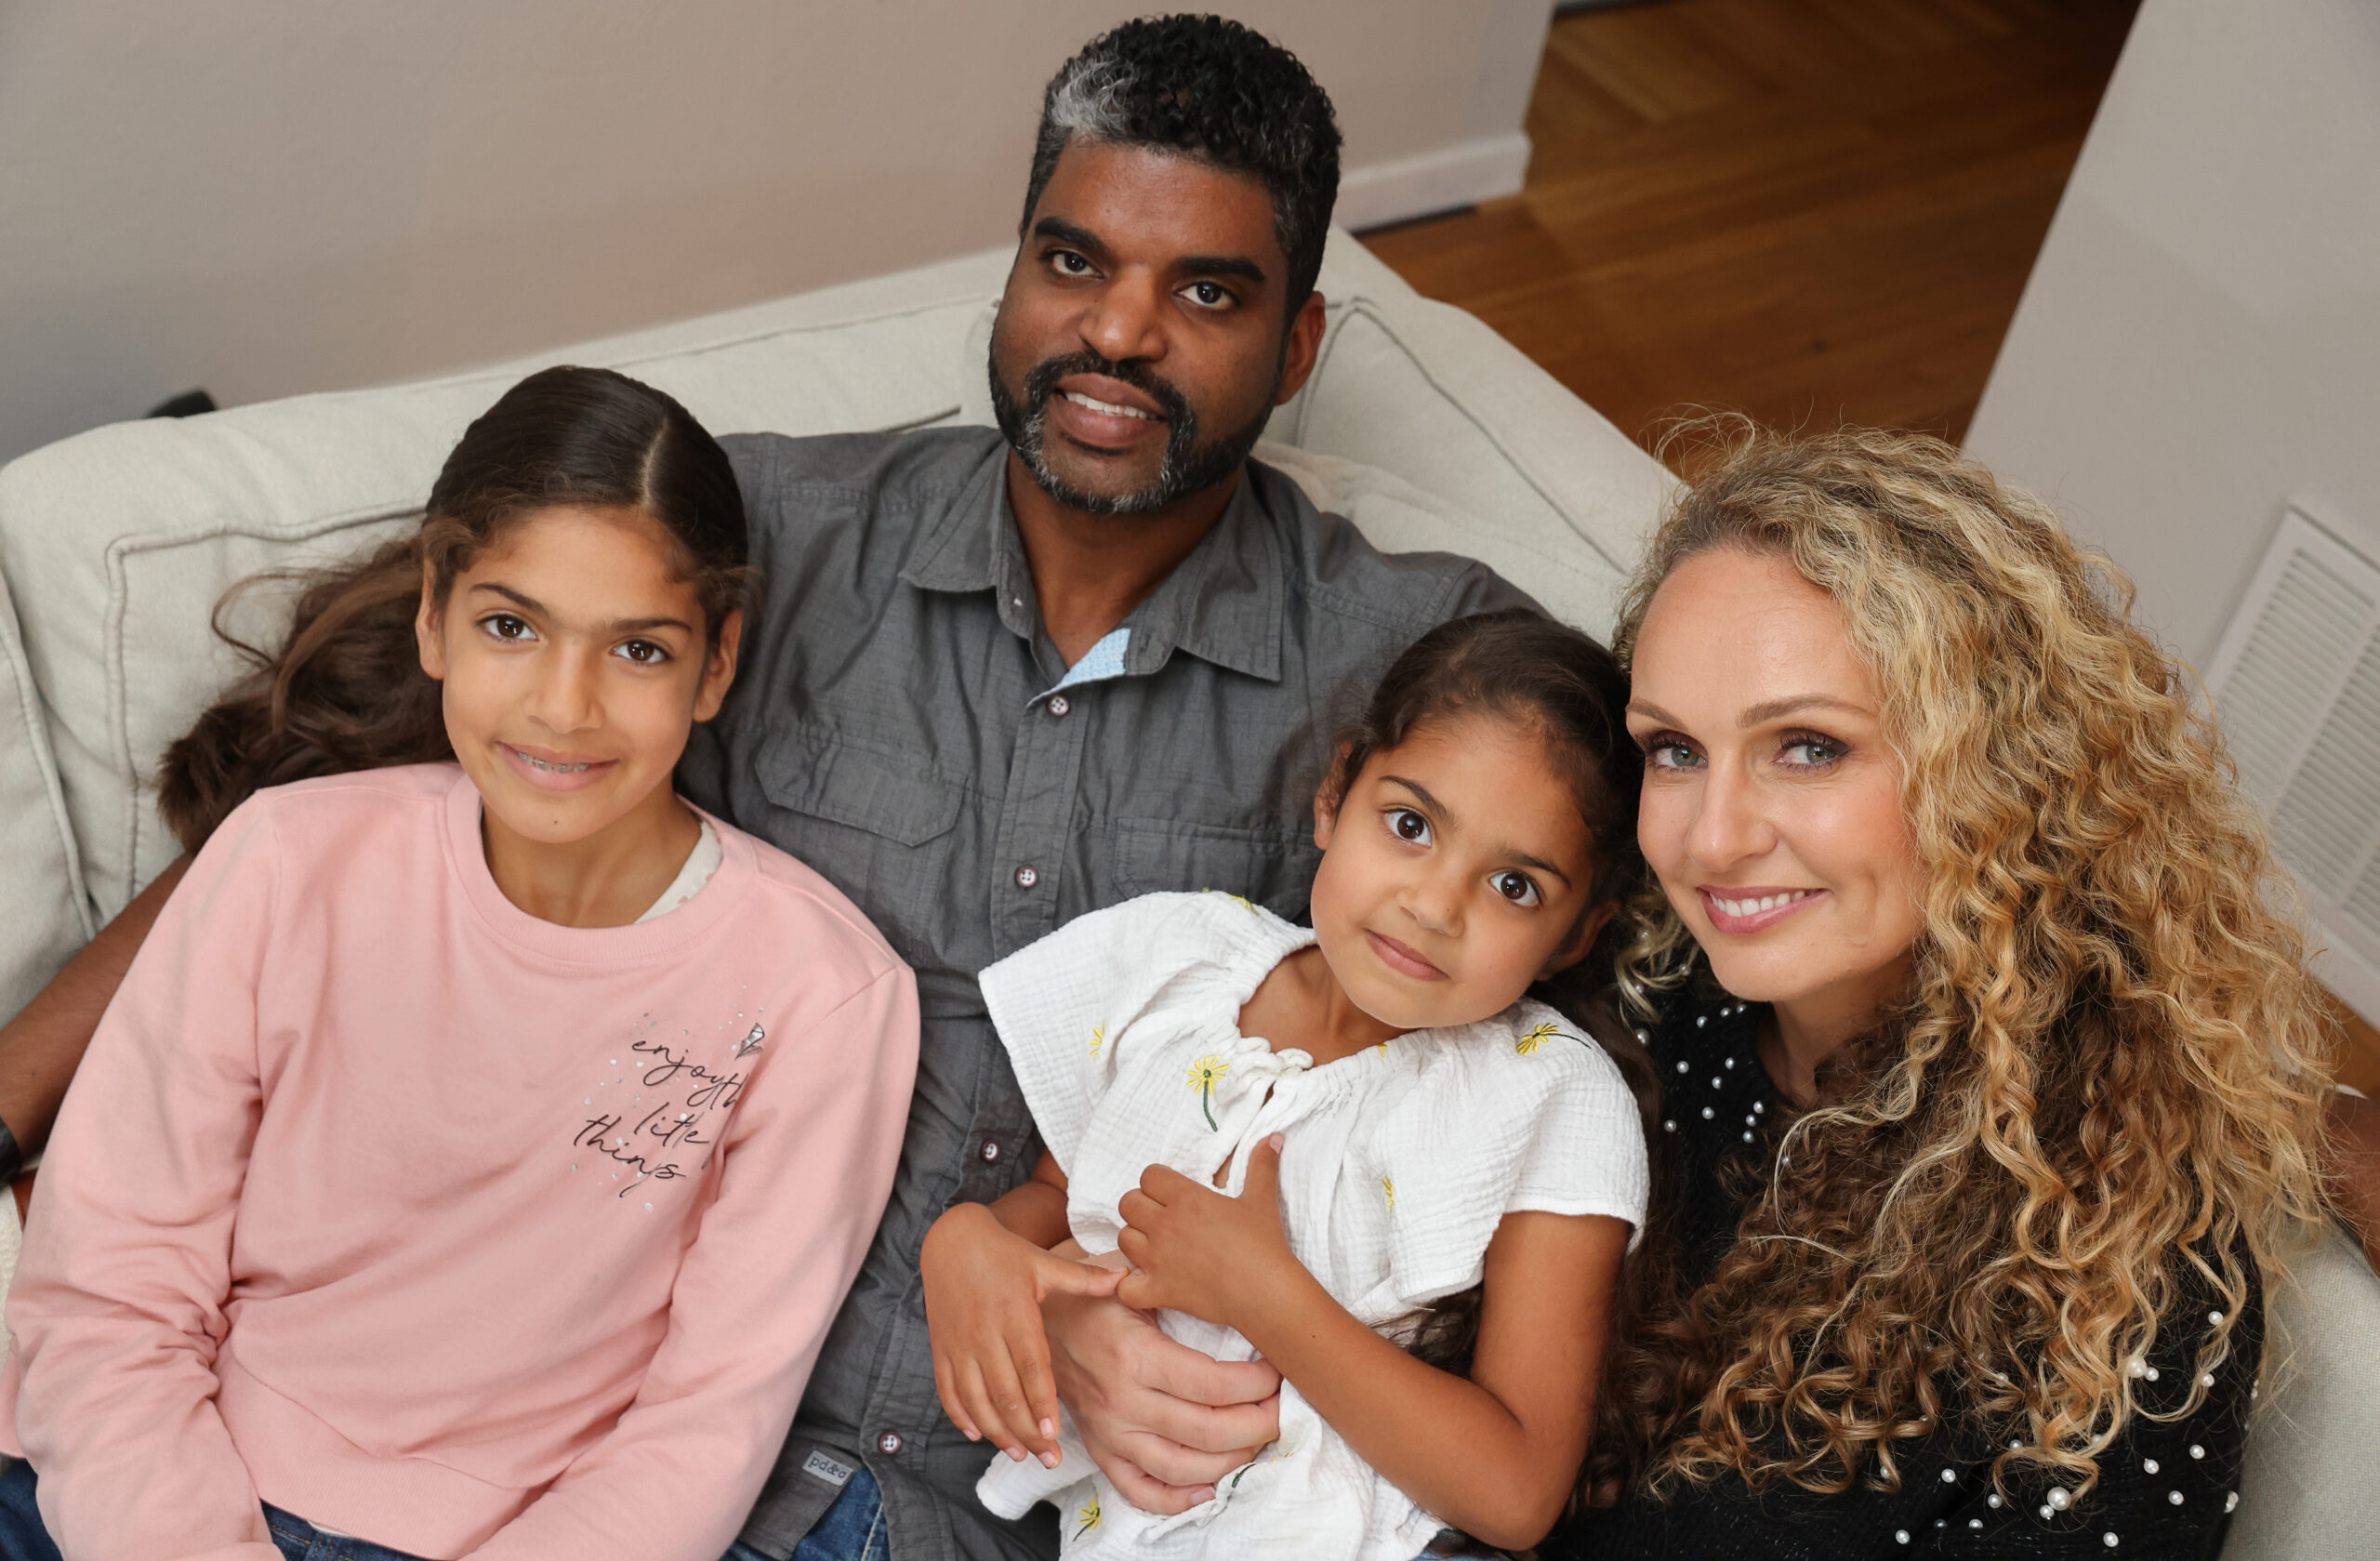 Xavier and Karolina Nazario with their daughters Zosia, 9, and Hania, 5. (Christopher Chung/ The Press Democrat)